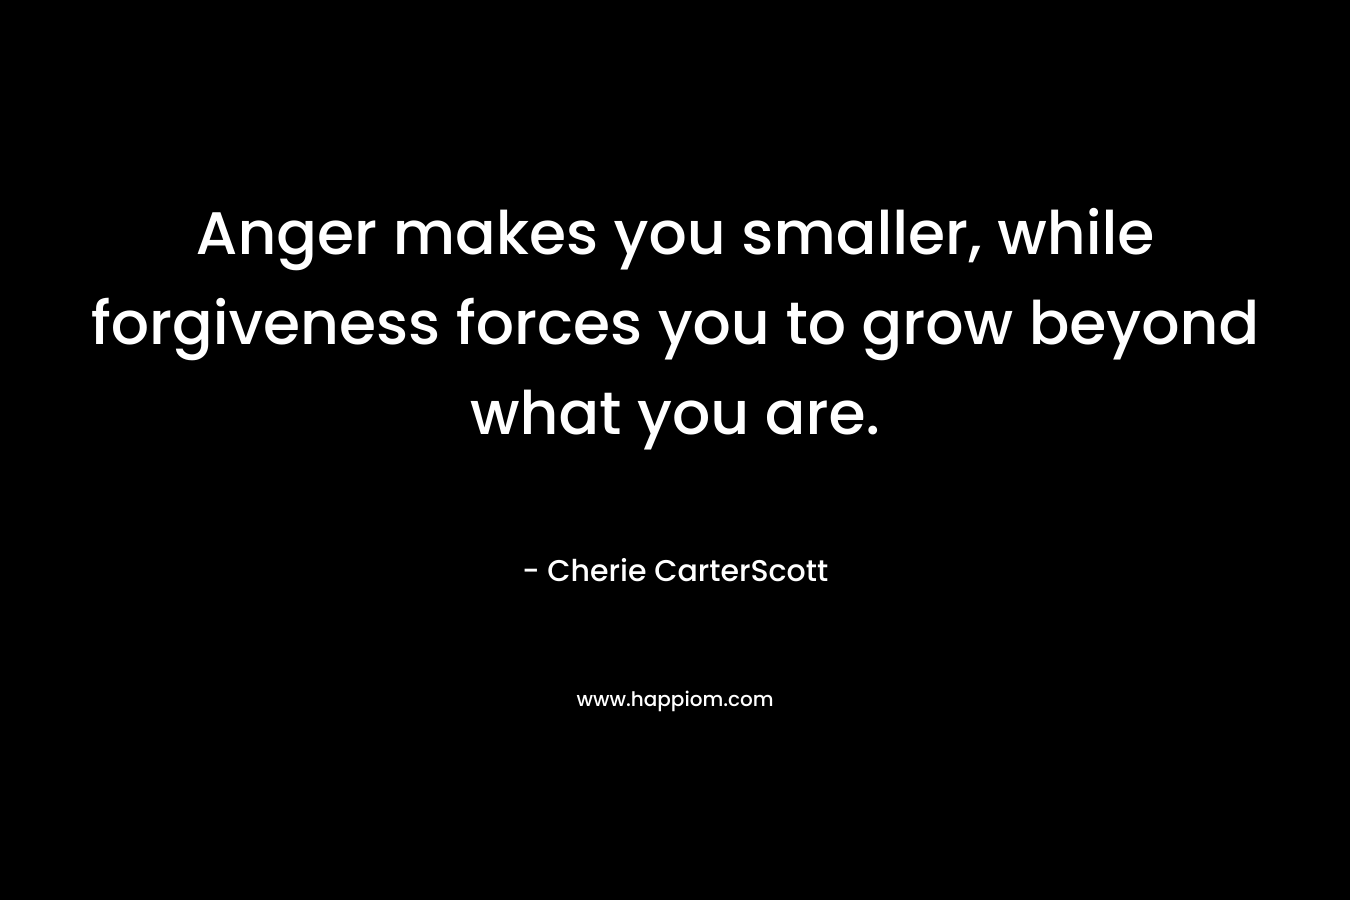 Anger makes you smaller, while forgiveness forces you to grow beyond what you are. – Cherie CarterScott